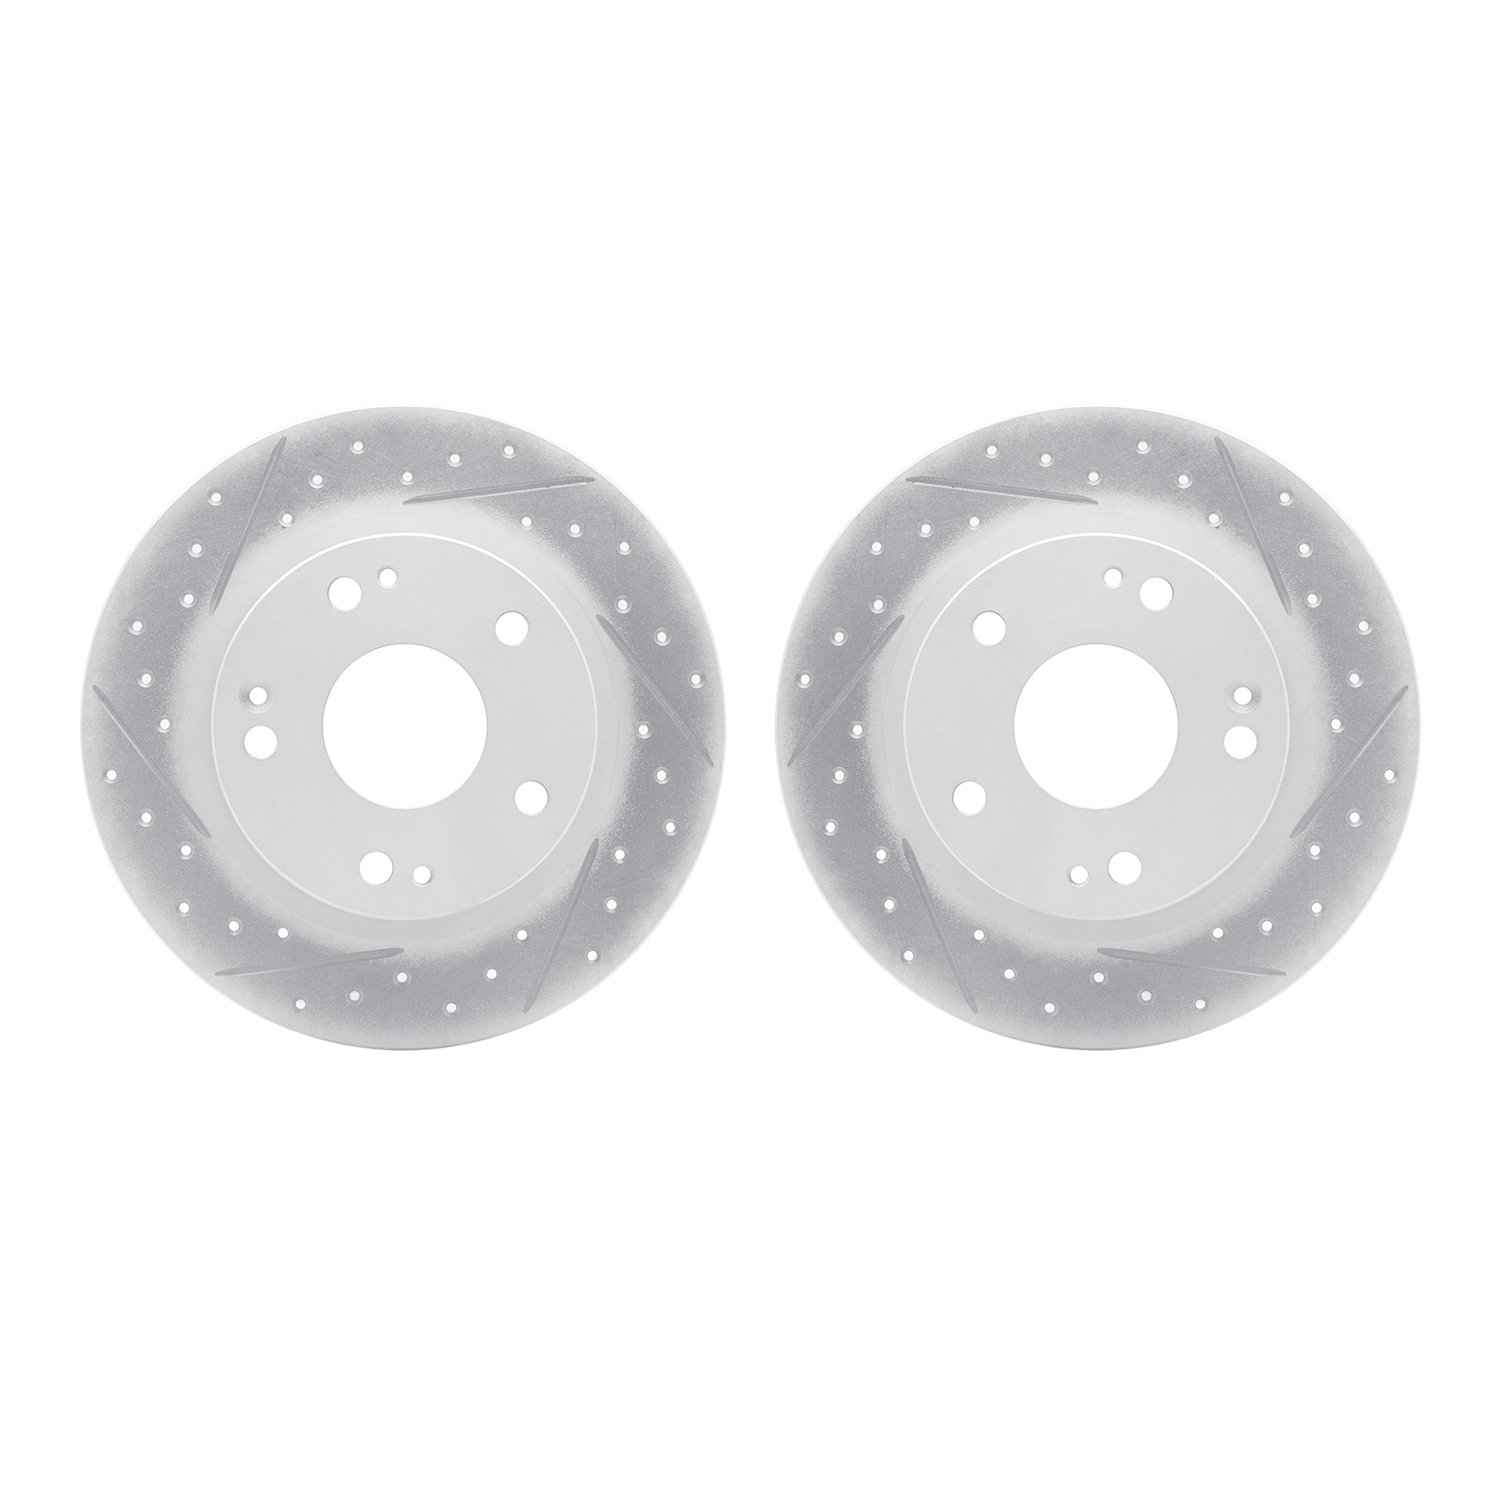 2002-59045 Geoperformance Drilled/Slotted Brake Rotors, Fits Select Acura/Honda, Position: Rear